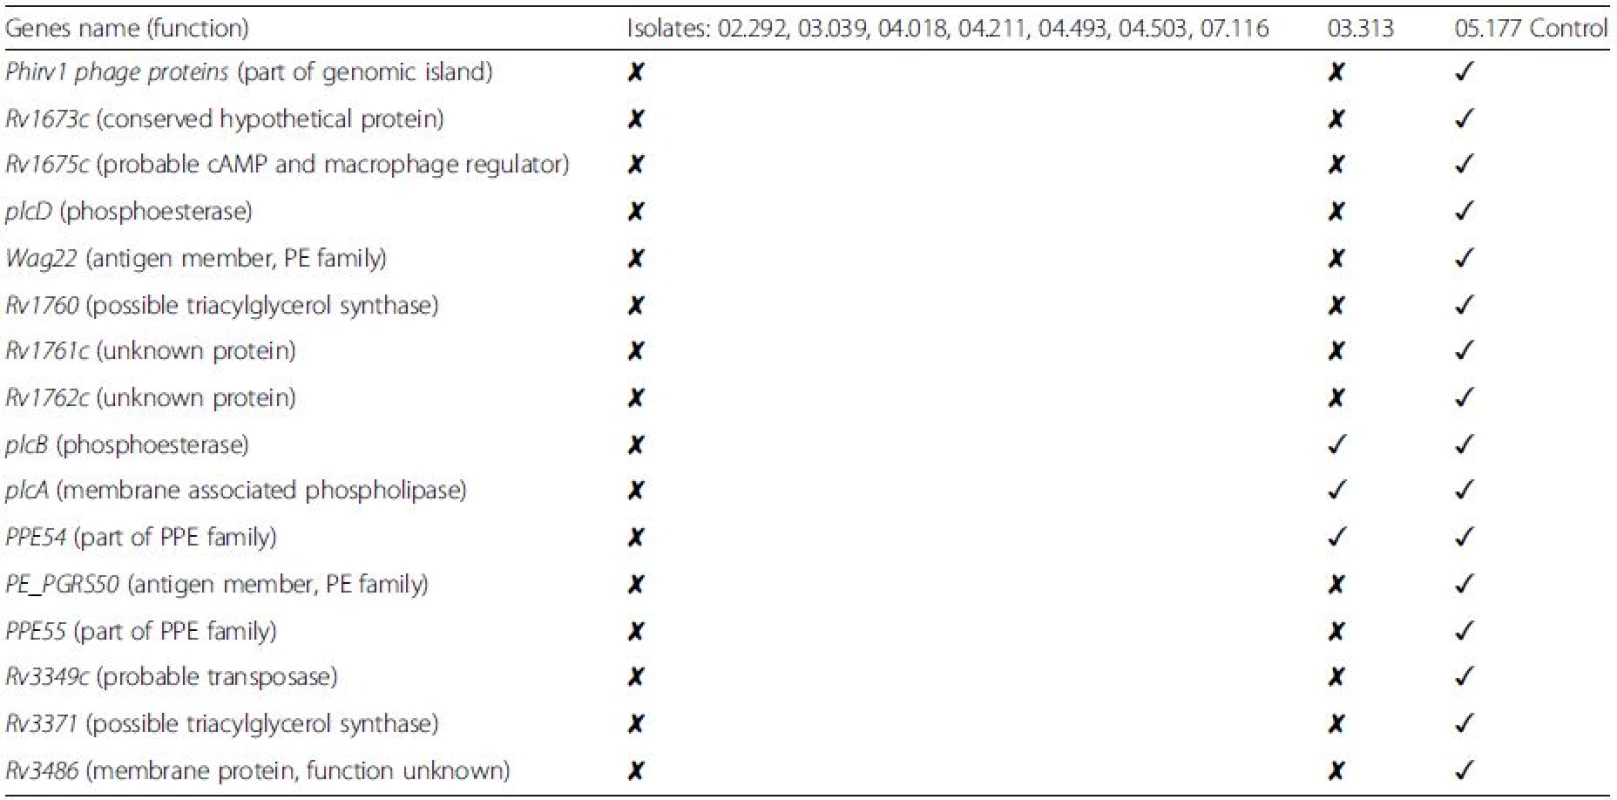 List of genes with complete deletion in the isoniazid-resistant outbreak strains